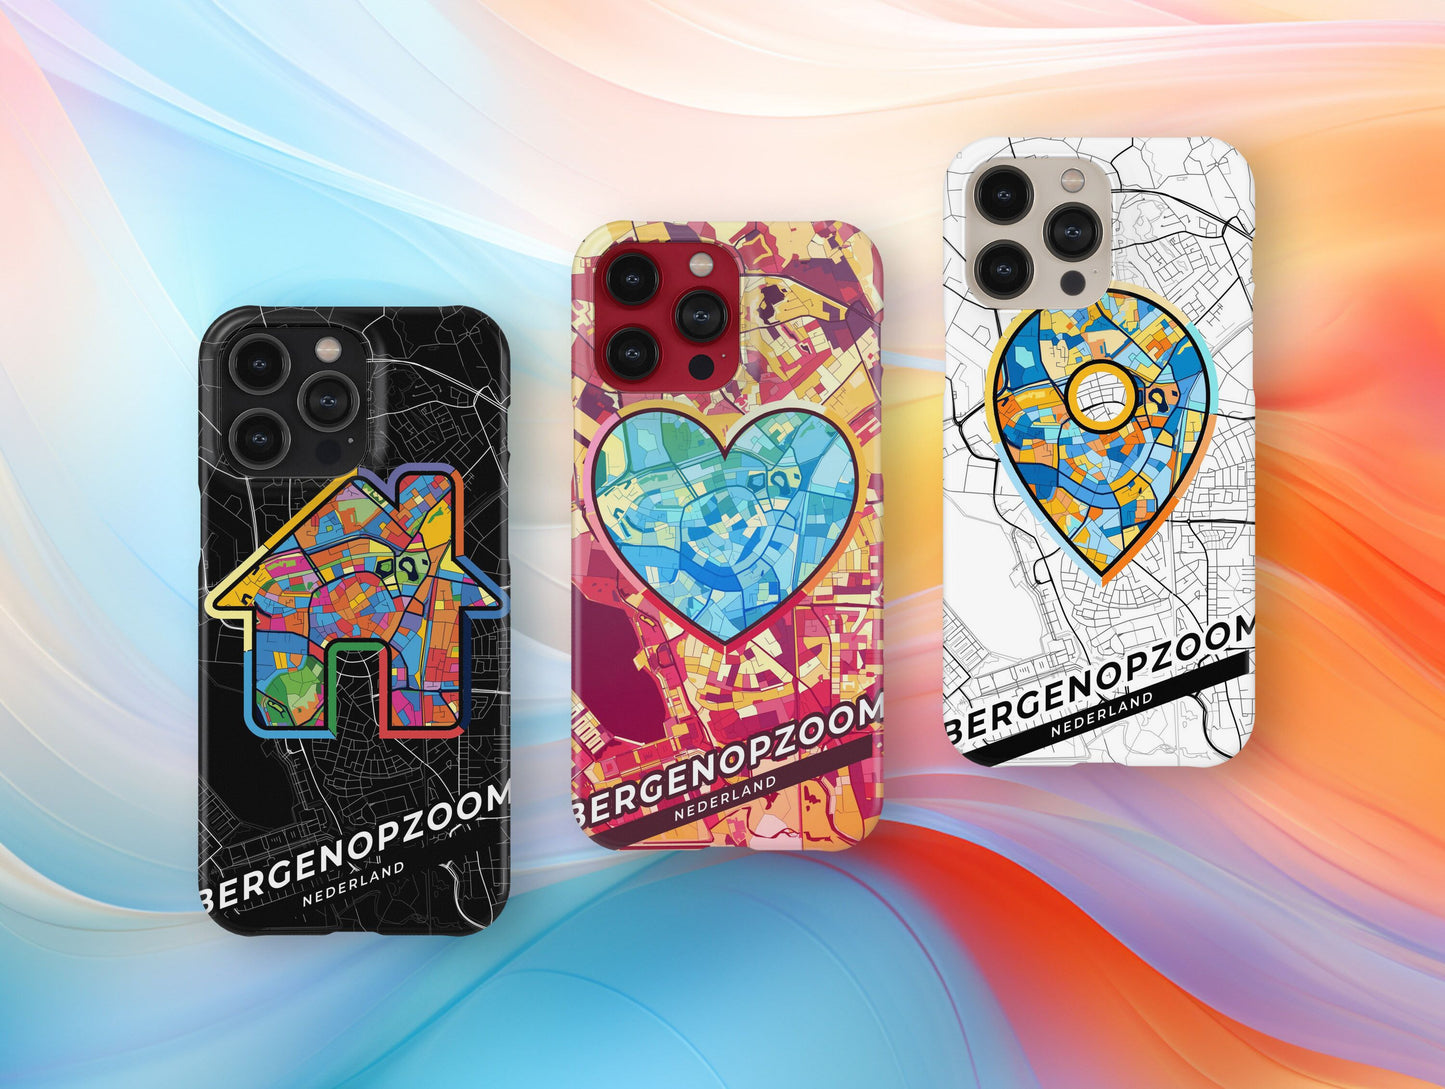 Bergen Op Zoom Netherlands slim phone case with colorful icon. Birthday, wedding or housewarming gift. Couple match cases.